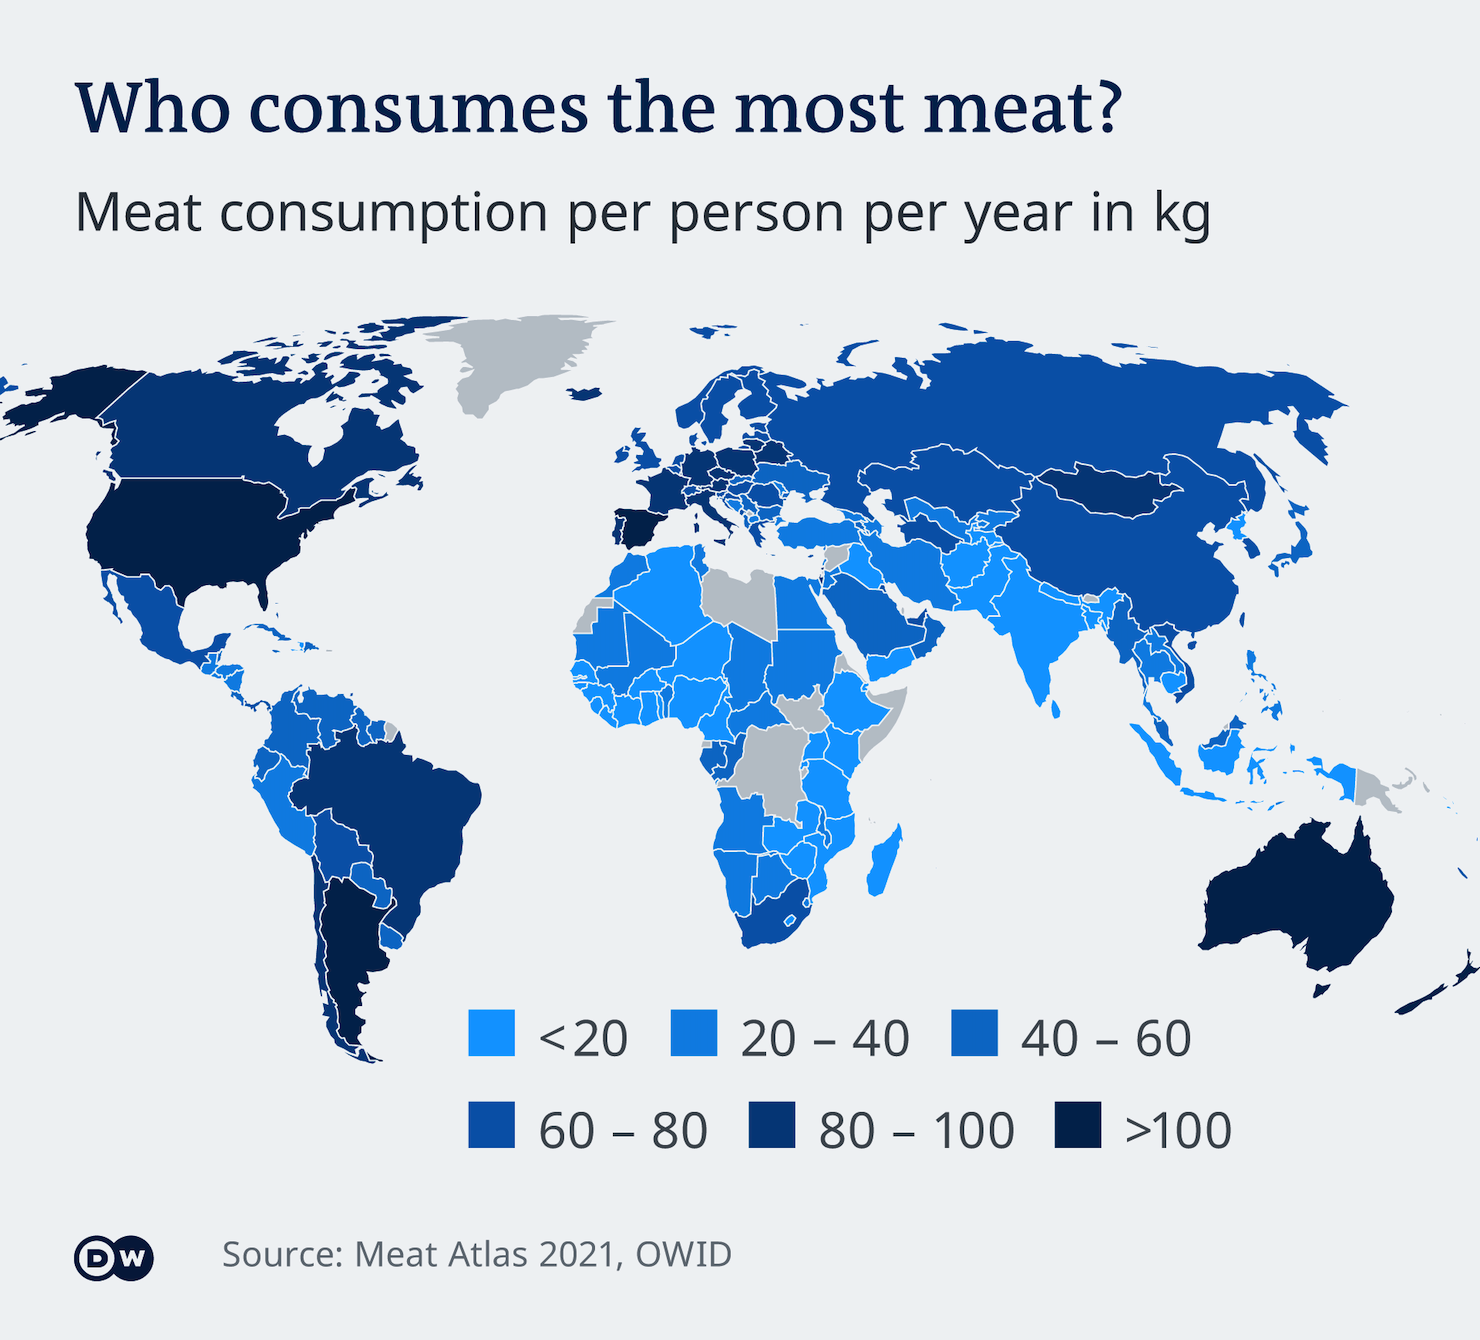 A world map showing meat consumption per capita